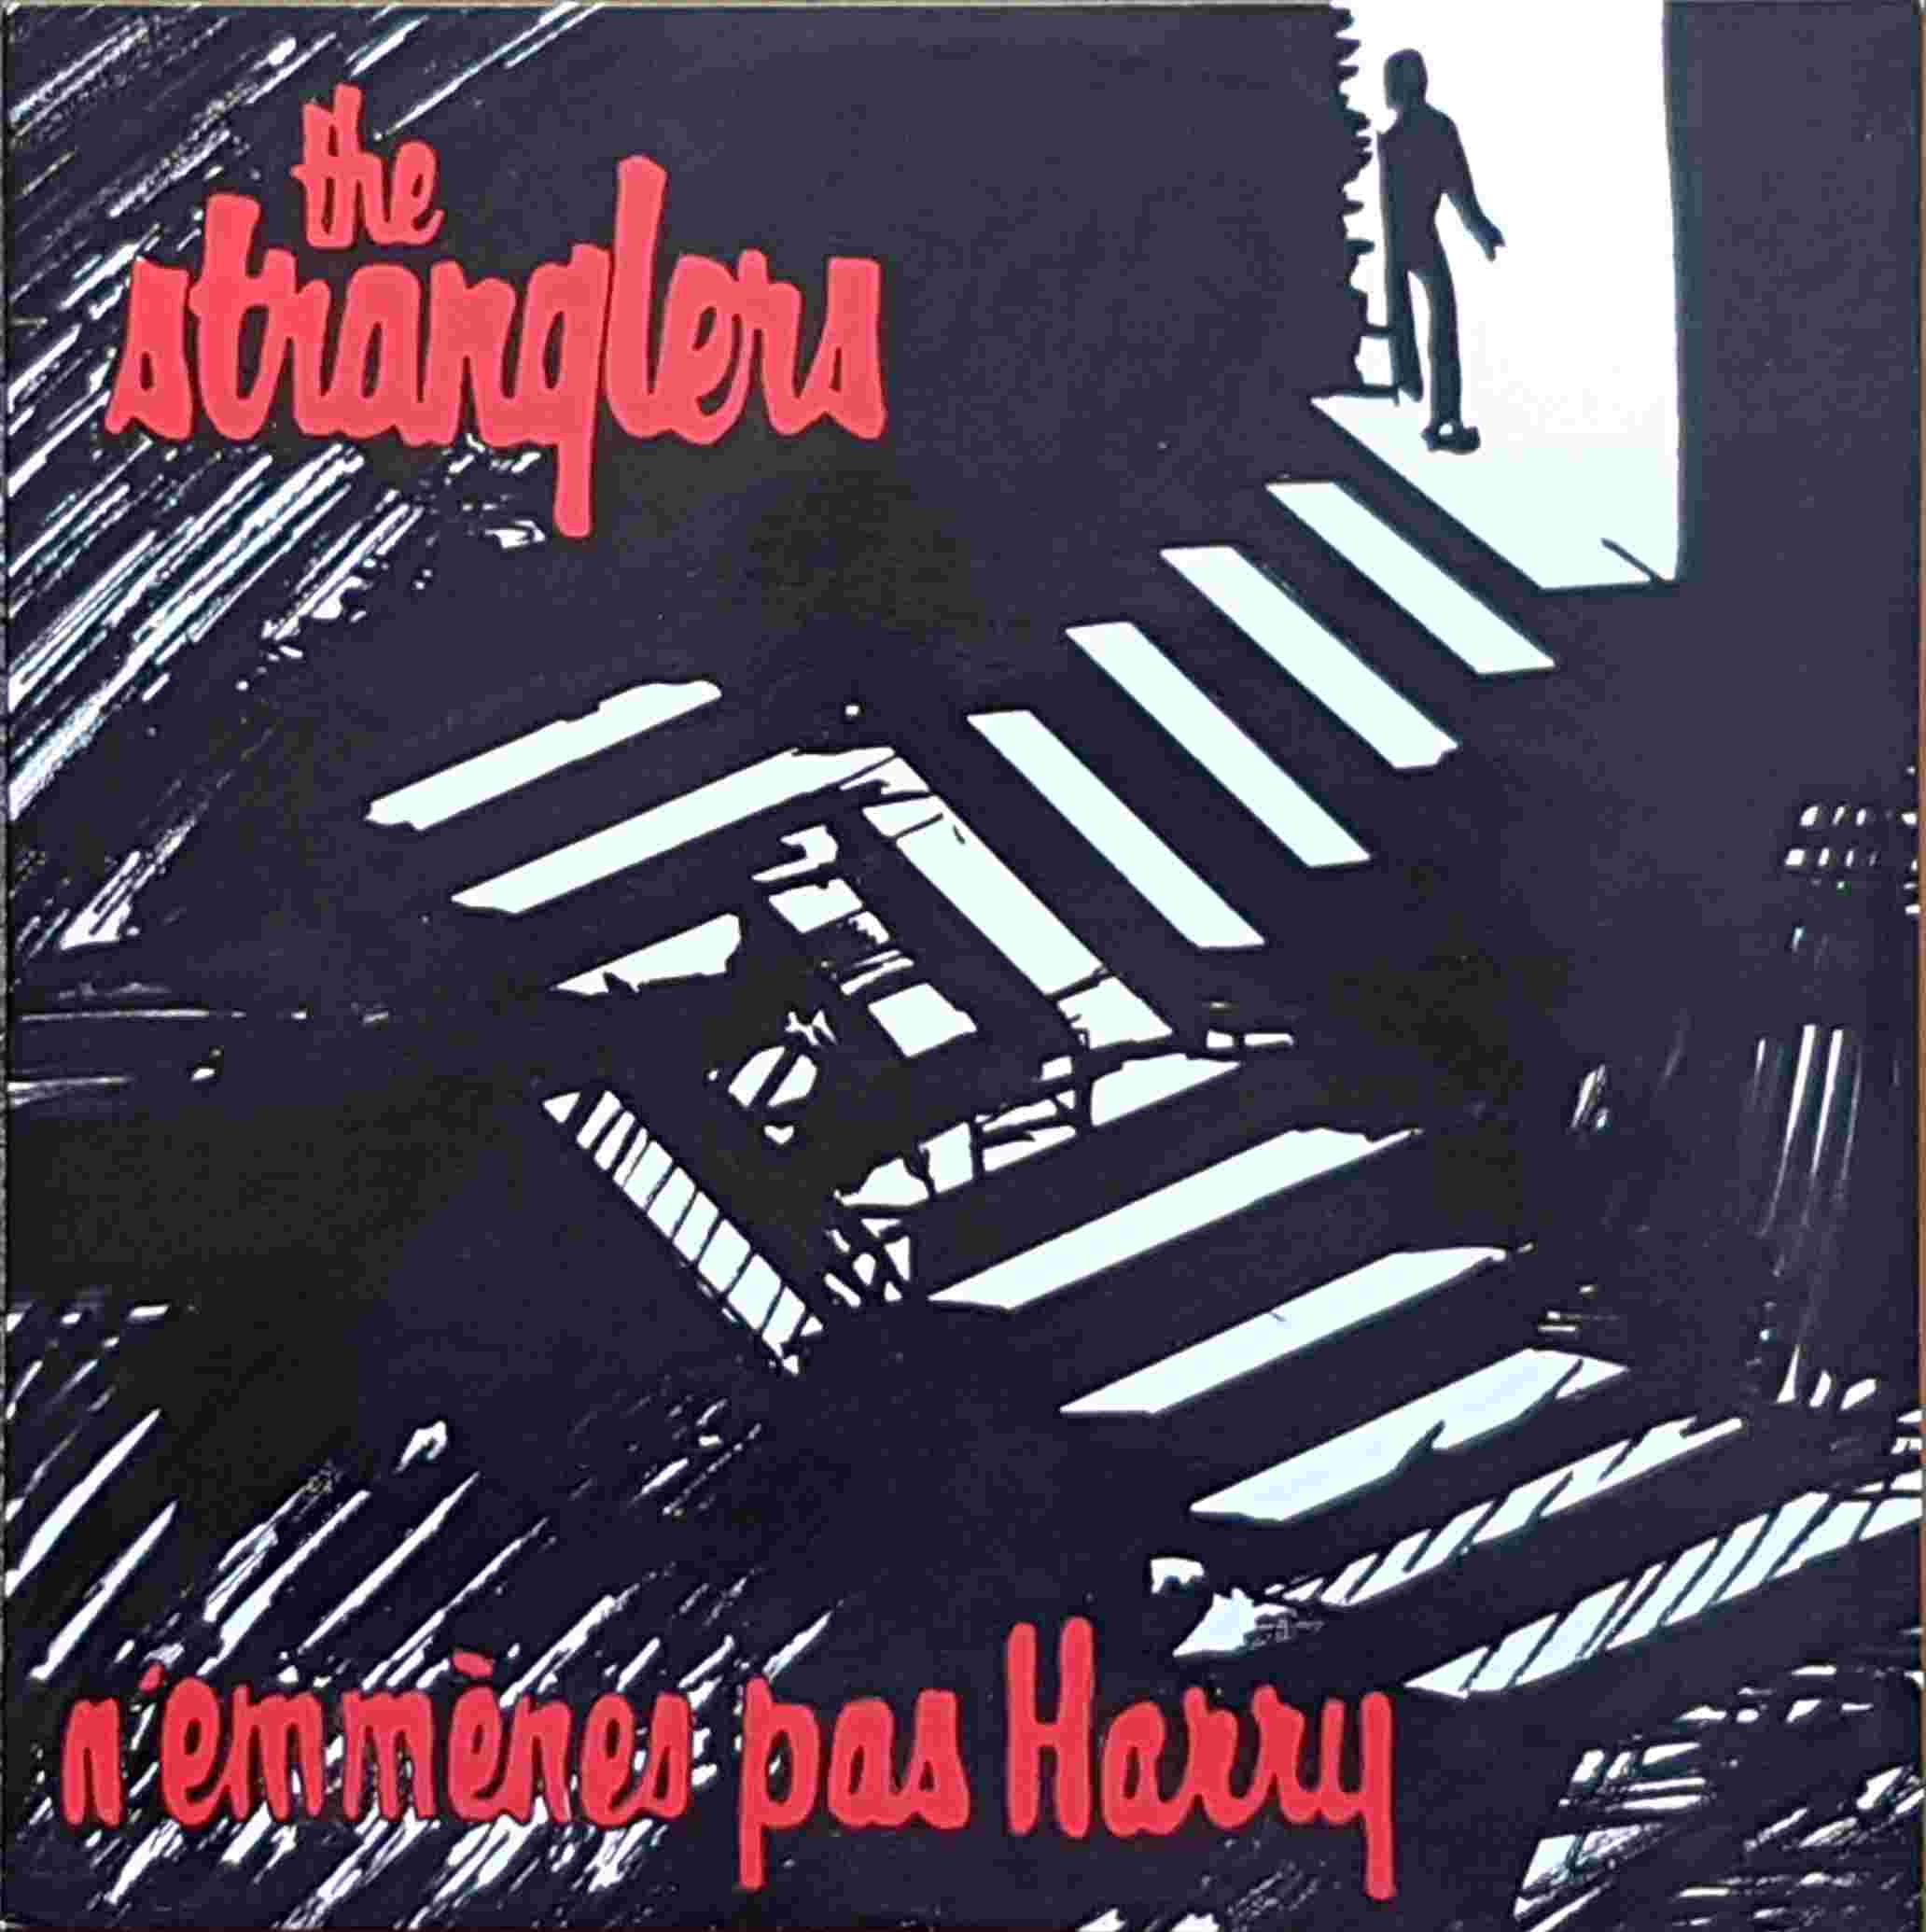 Picture of HARRY 1 N'emmenes pas Harry - French import by artist The Stranglers  from The Stranglers 12inches